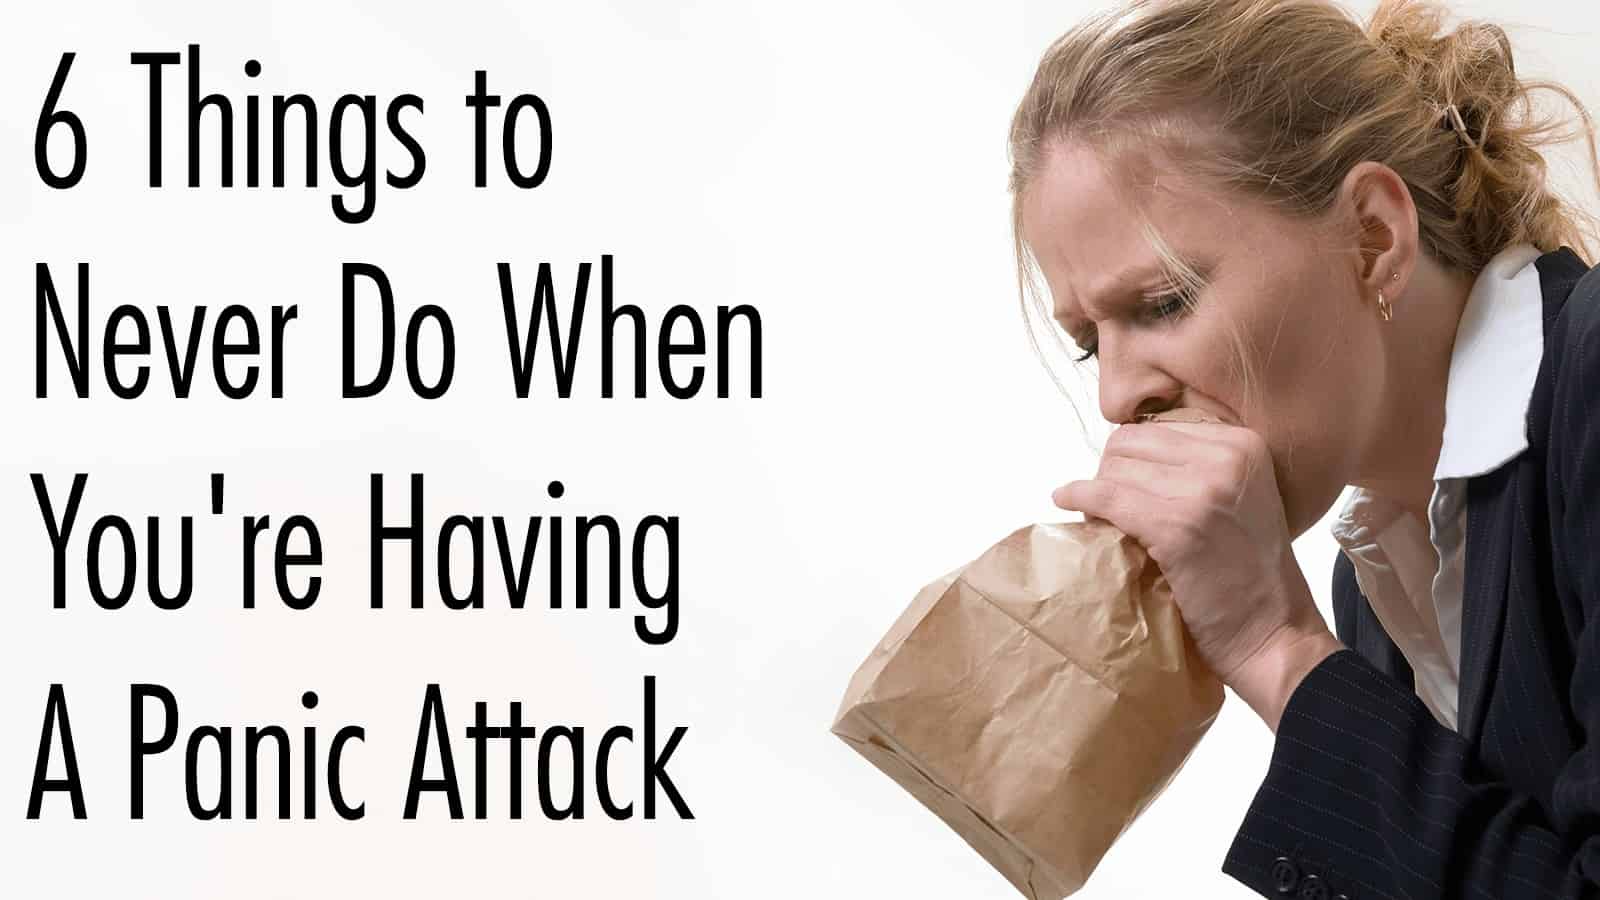 6 Things to Never Do When You’re Having A Panic Attack